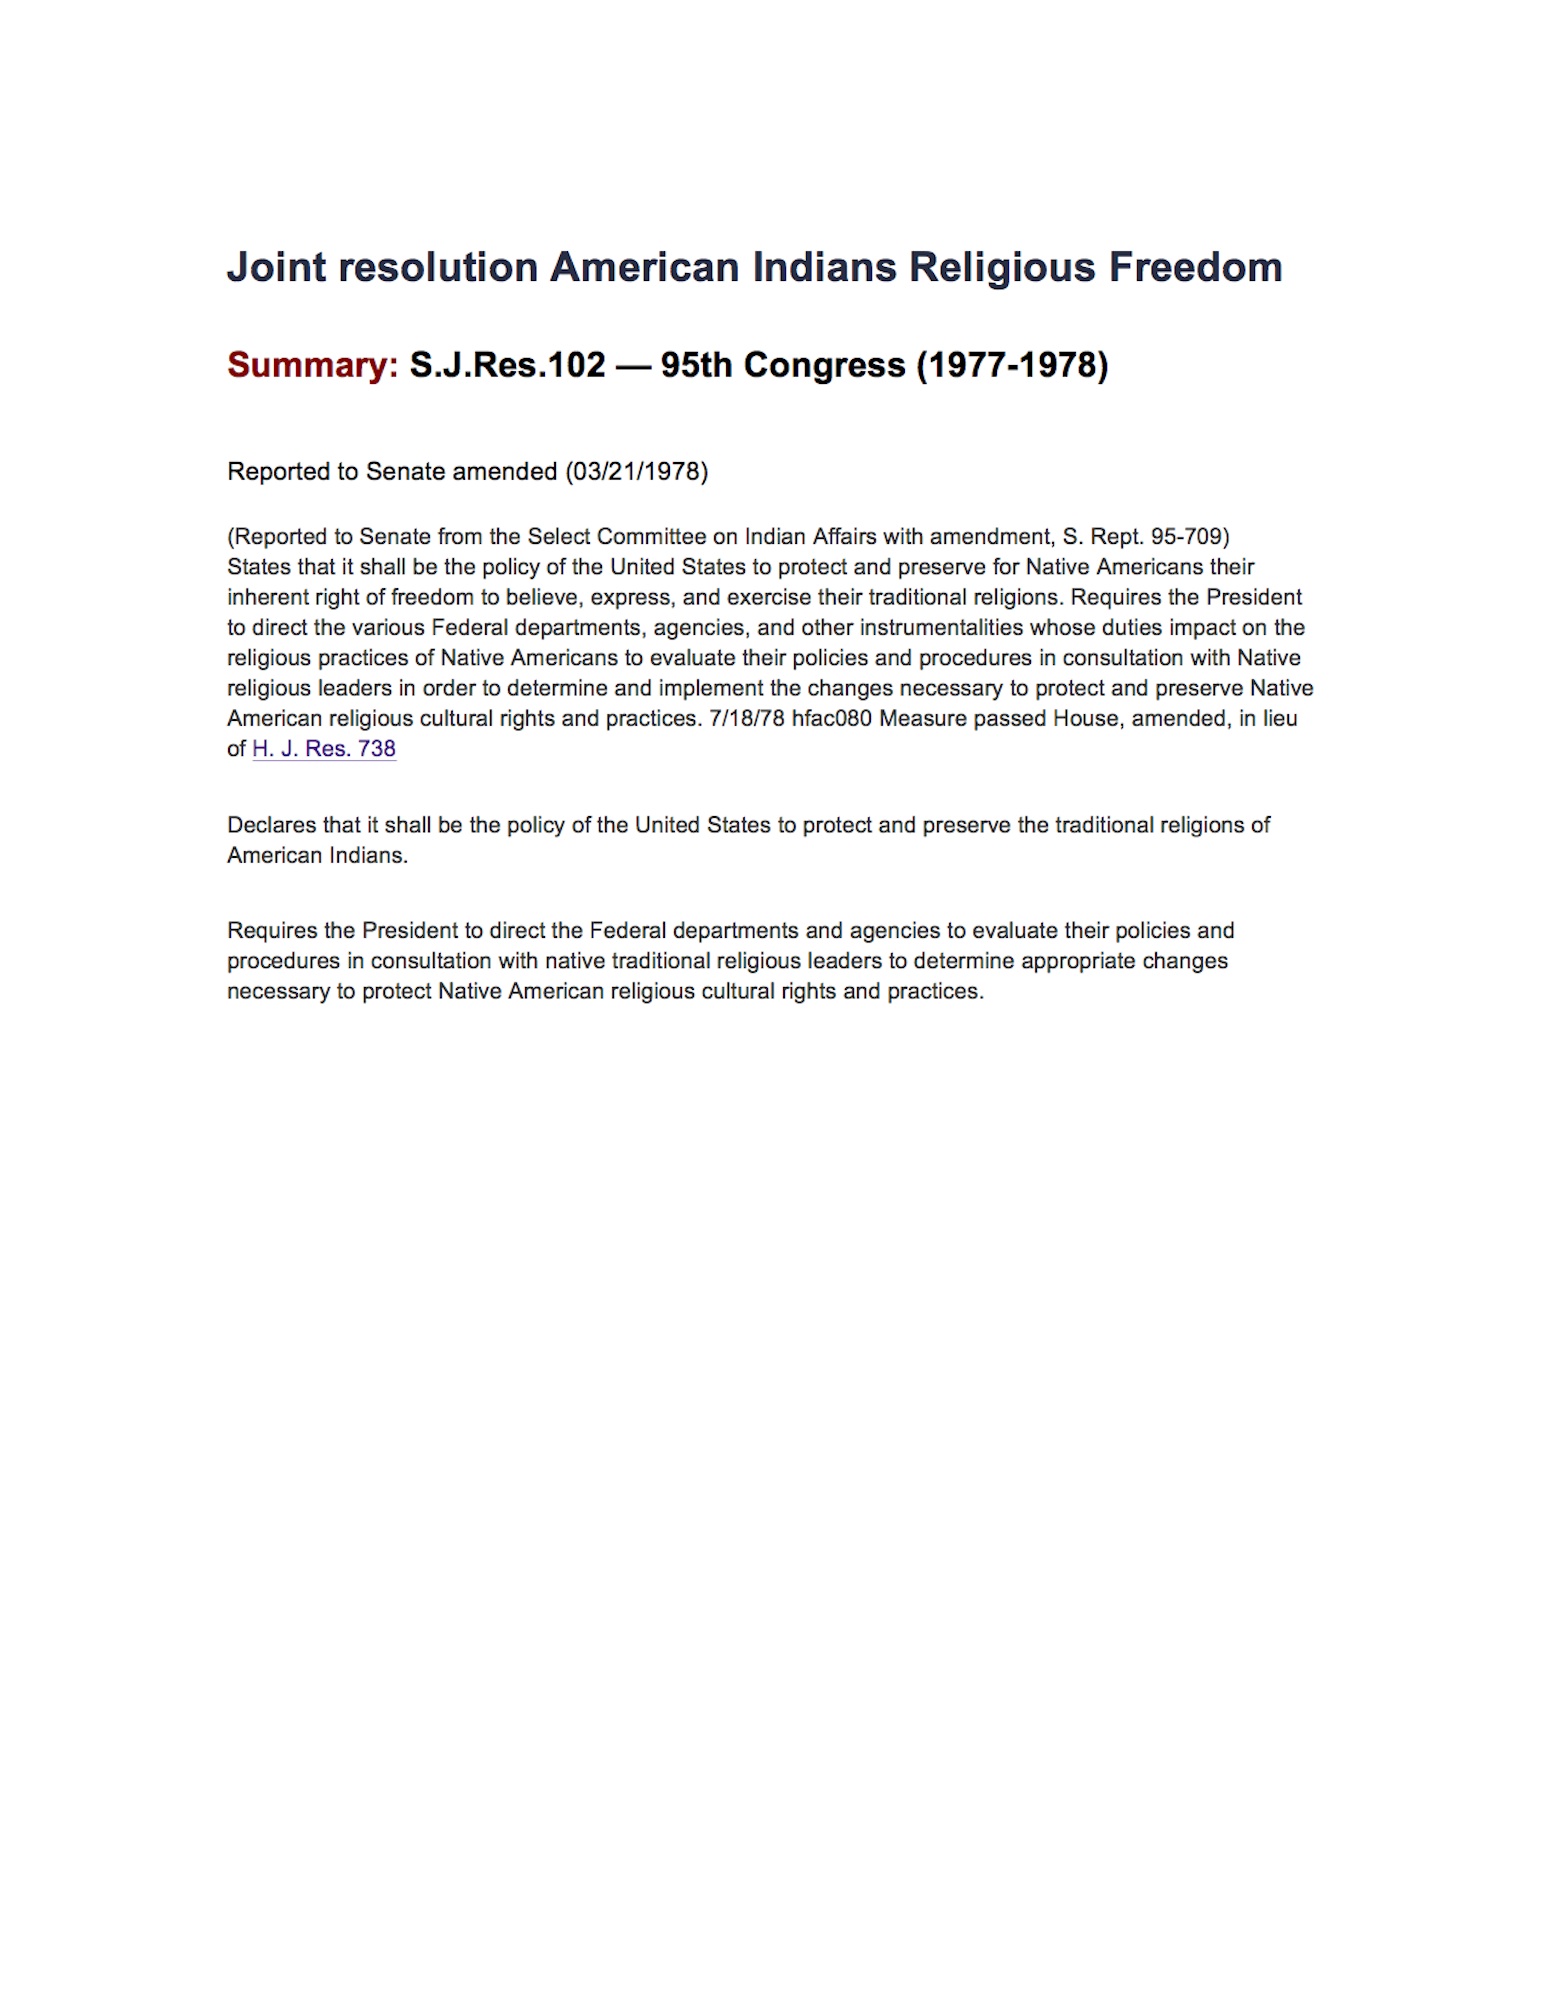 American Indians Religious Freedom Act